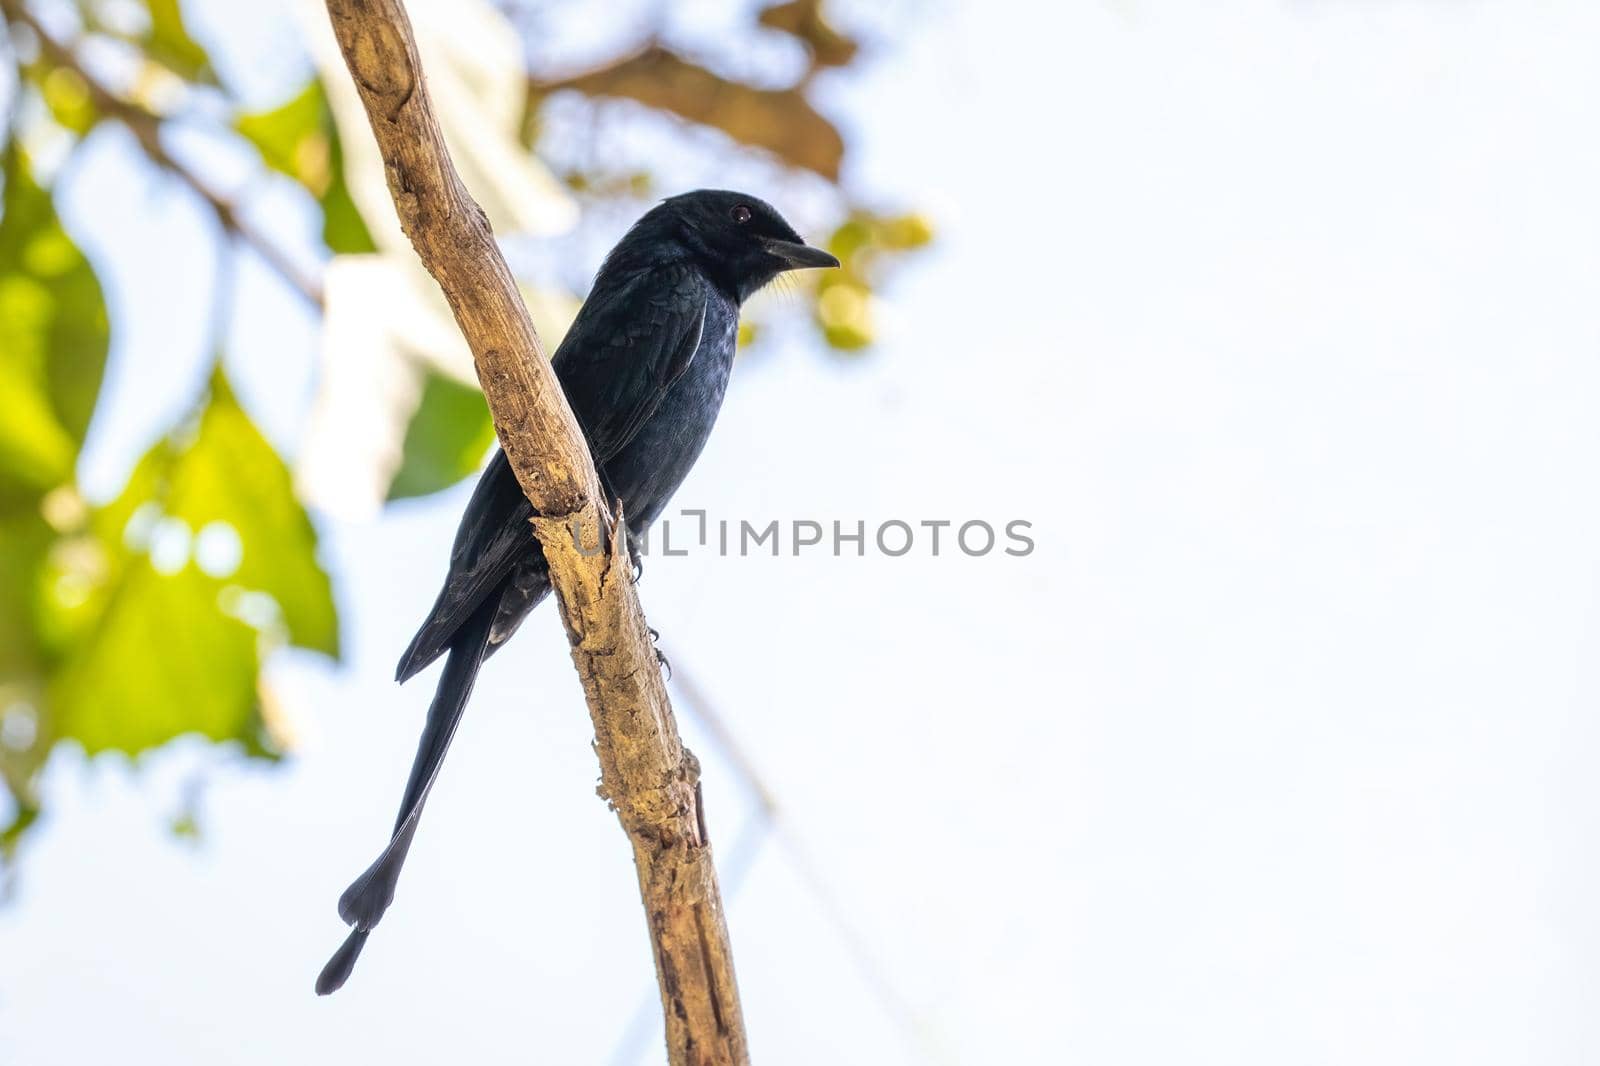 Image of Greater Racquet-tailed Drongo (Dicrurus paradiseus) perched on a branch on nature background. Bird. Animals.